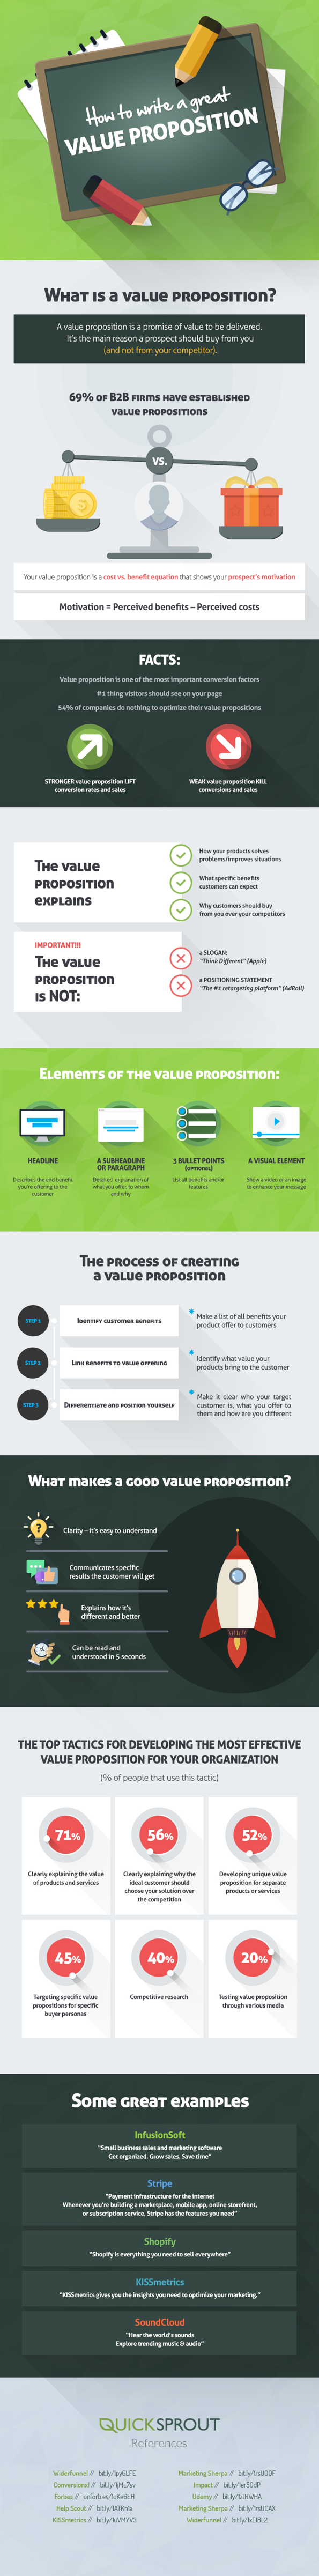 how-to-write-a-value-proposition-that-sells-infographic-image